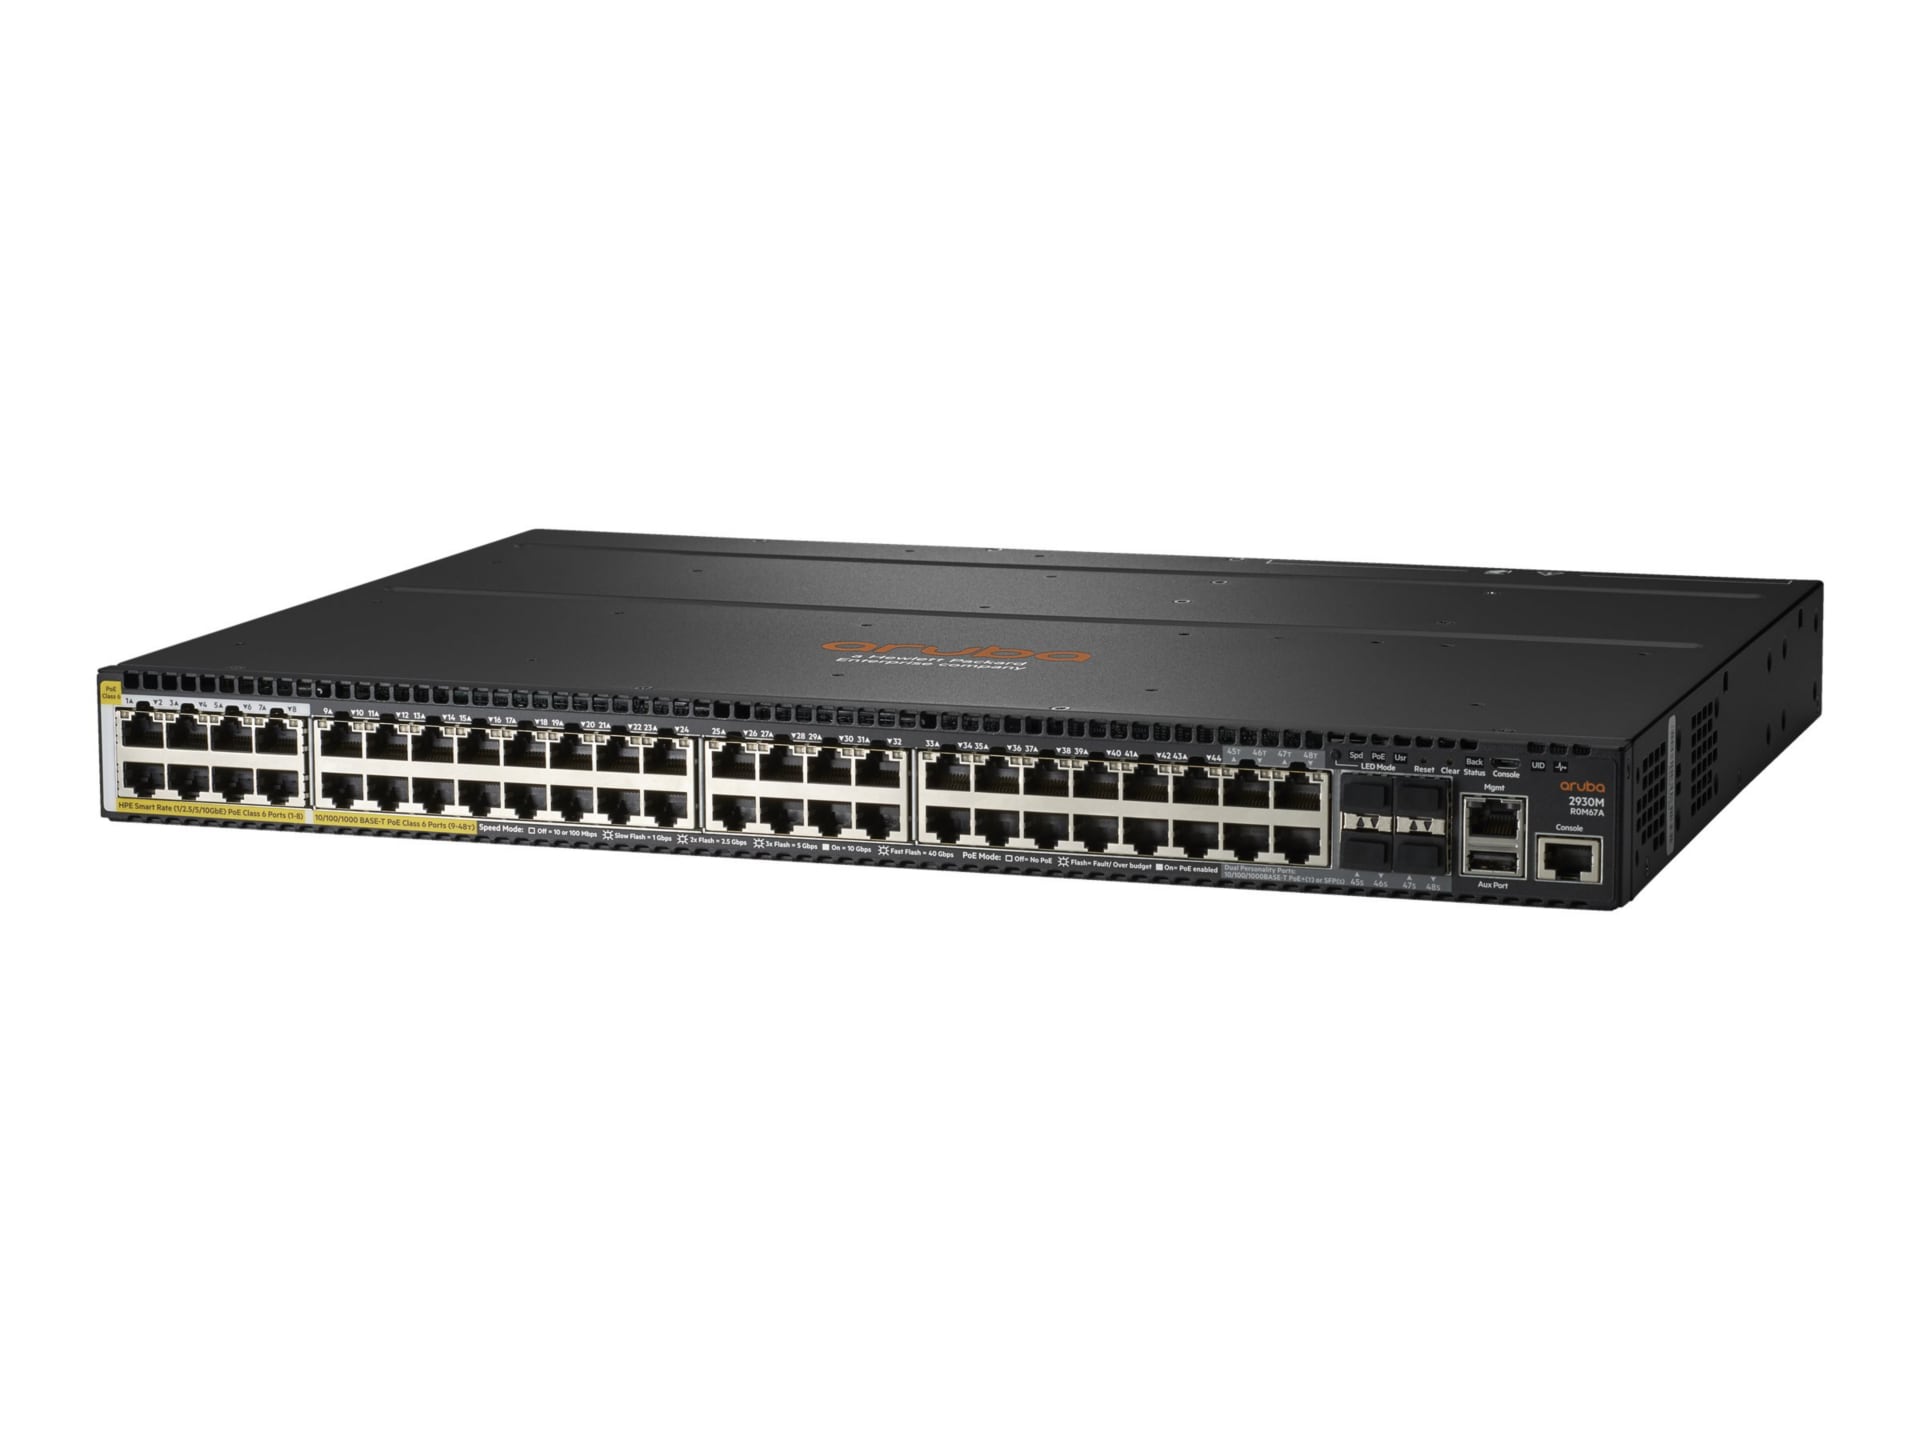 HPE Aruba 2930M 40G 8 HPE Smart Rate PoE Class 6 1-slot Switch - switch - 48 ports - managed - rack-mountable